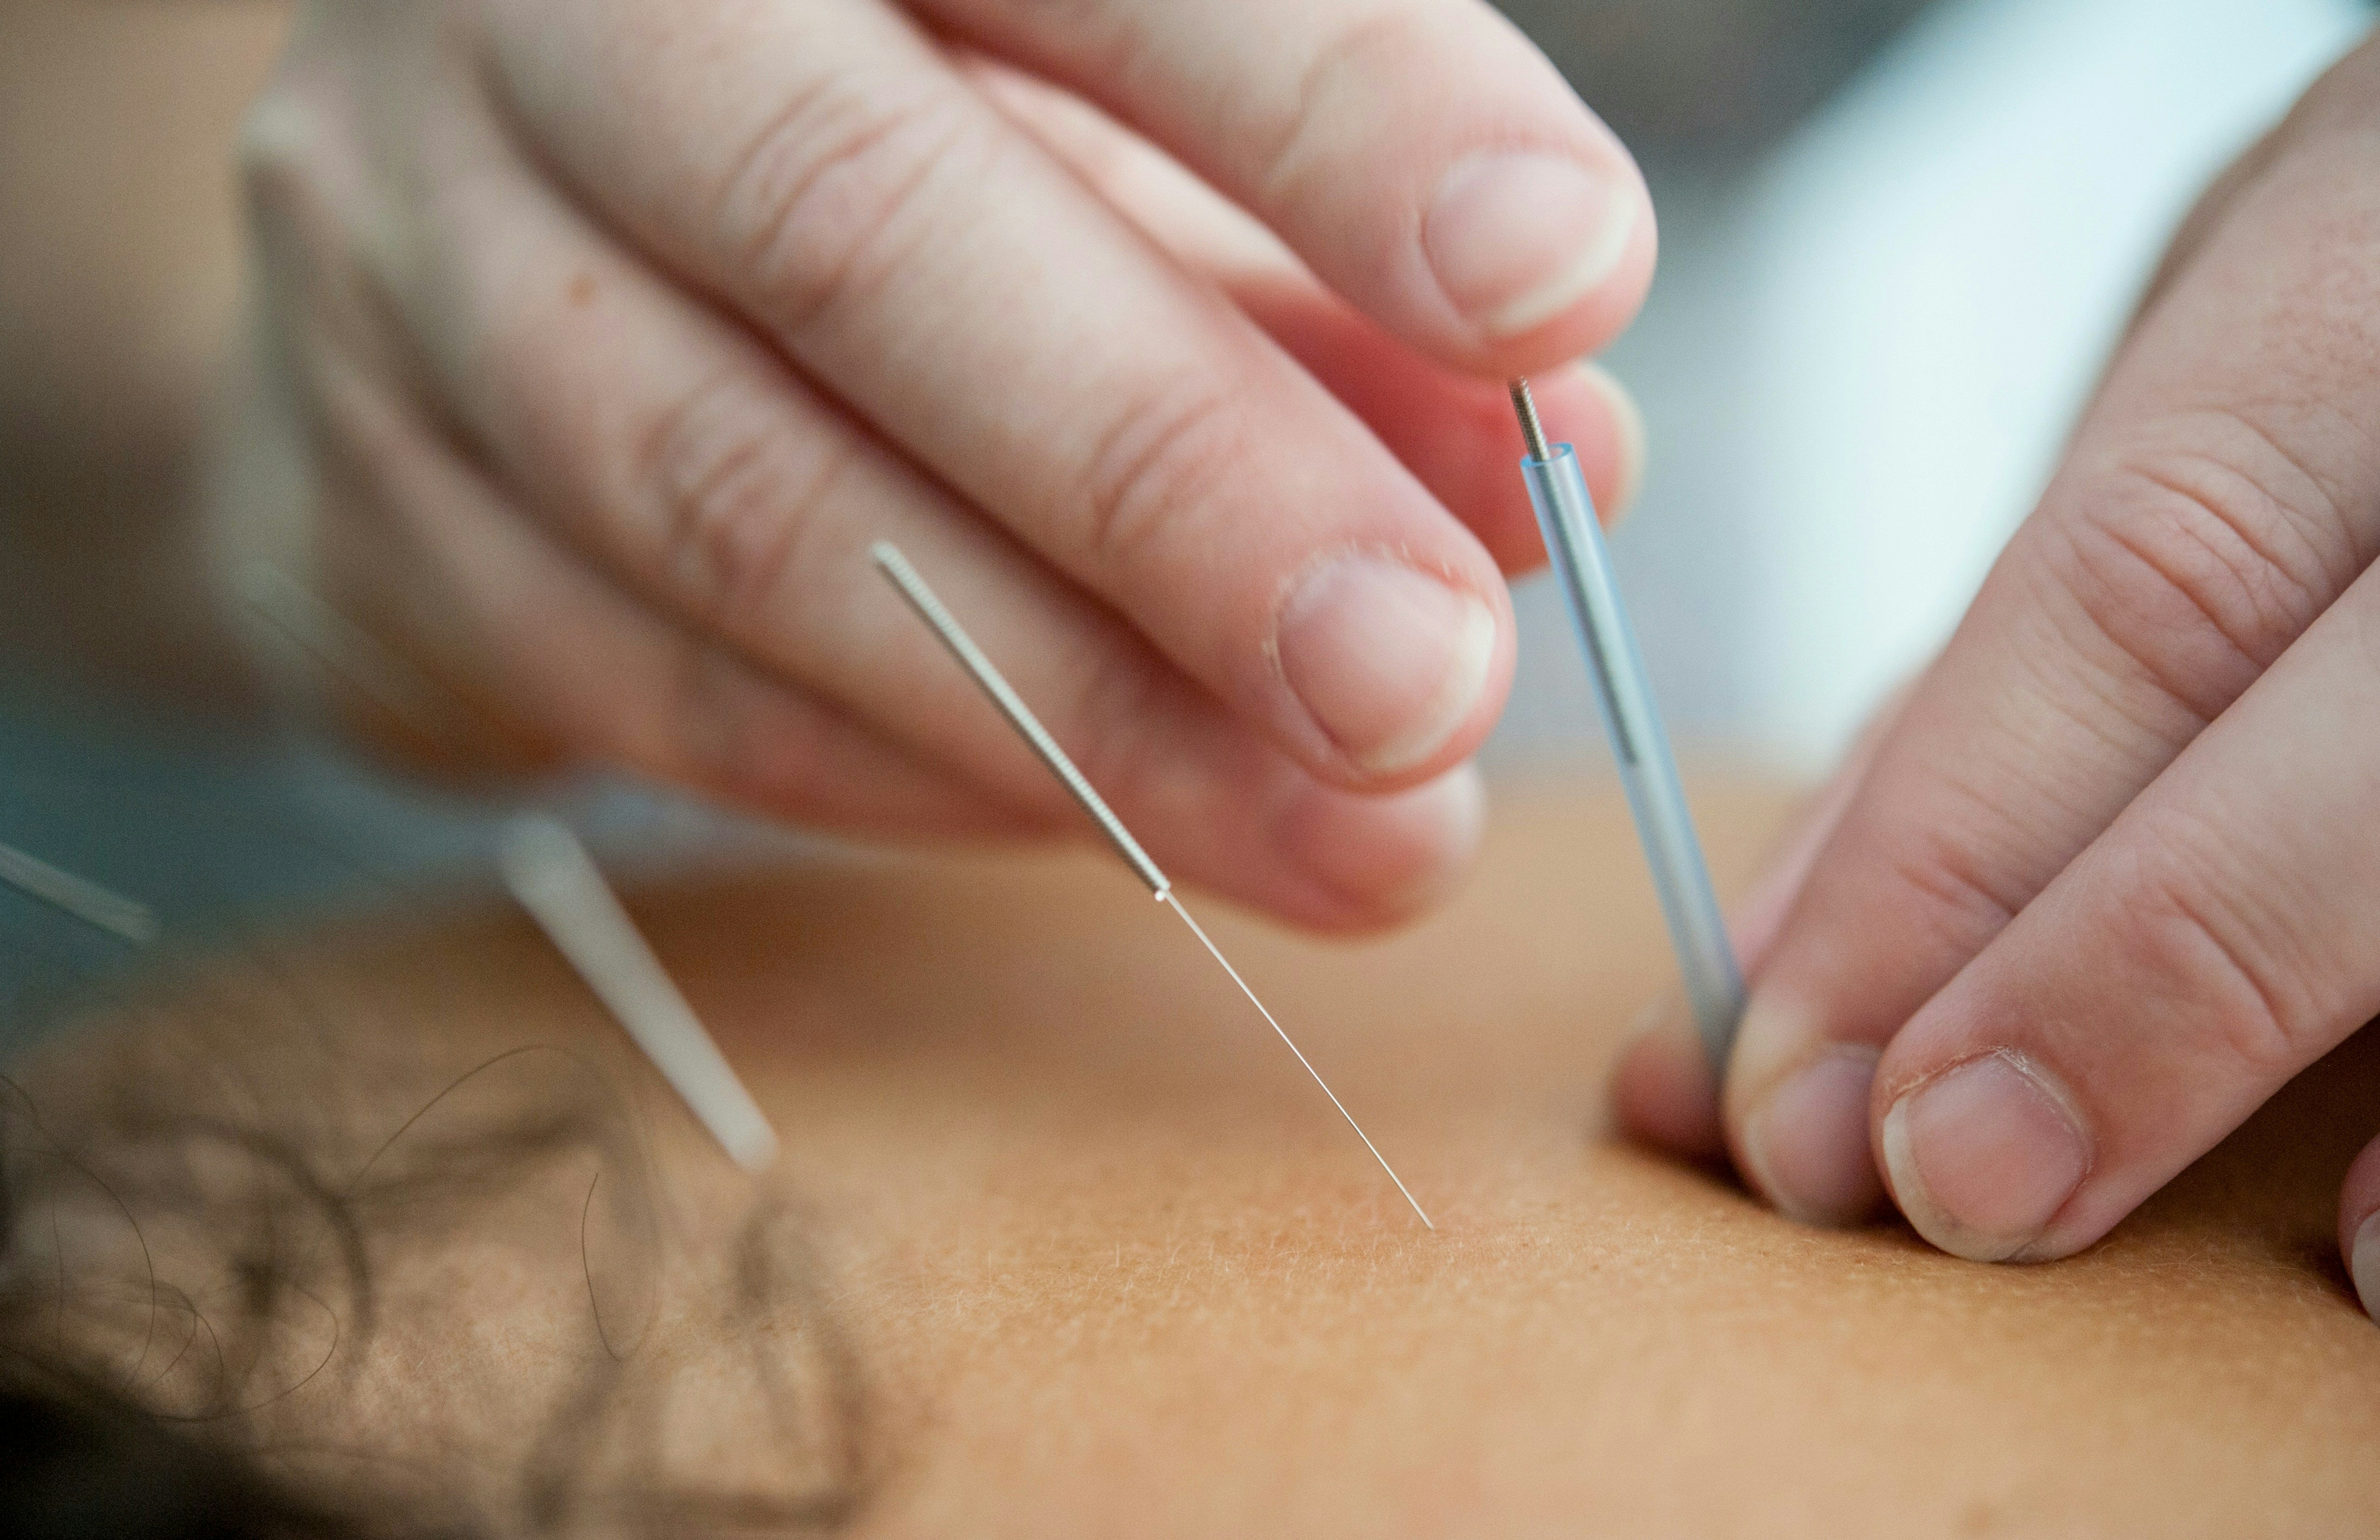 The growing acceptance of acupuncture in mainstream medicine is increasing in popularity and effectiveness. Backed by research and boasting millions of satisfied users, discover why acupuncture is the key to holistic wellness!